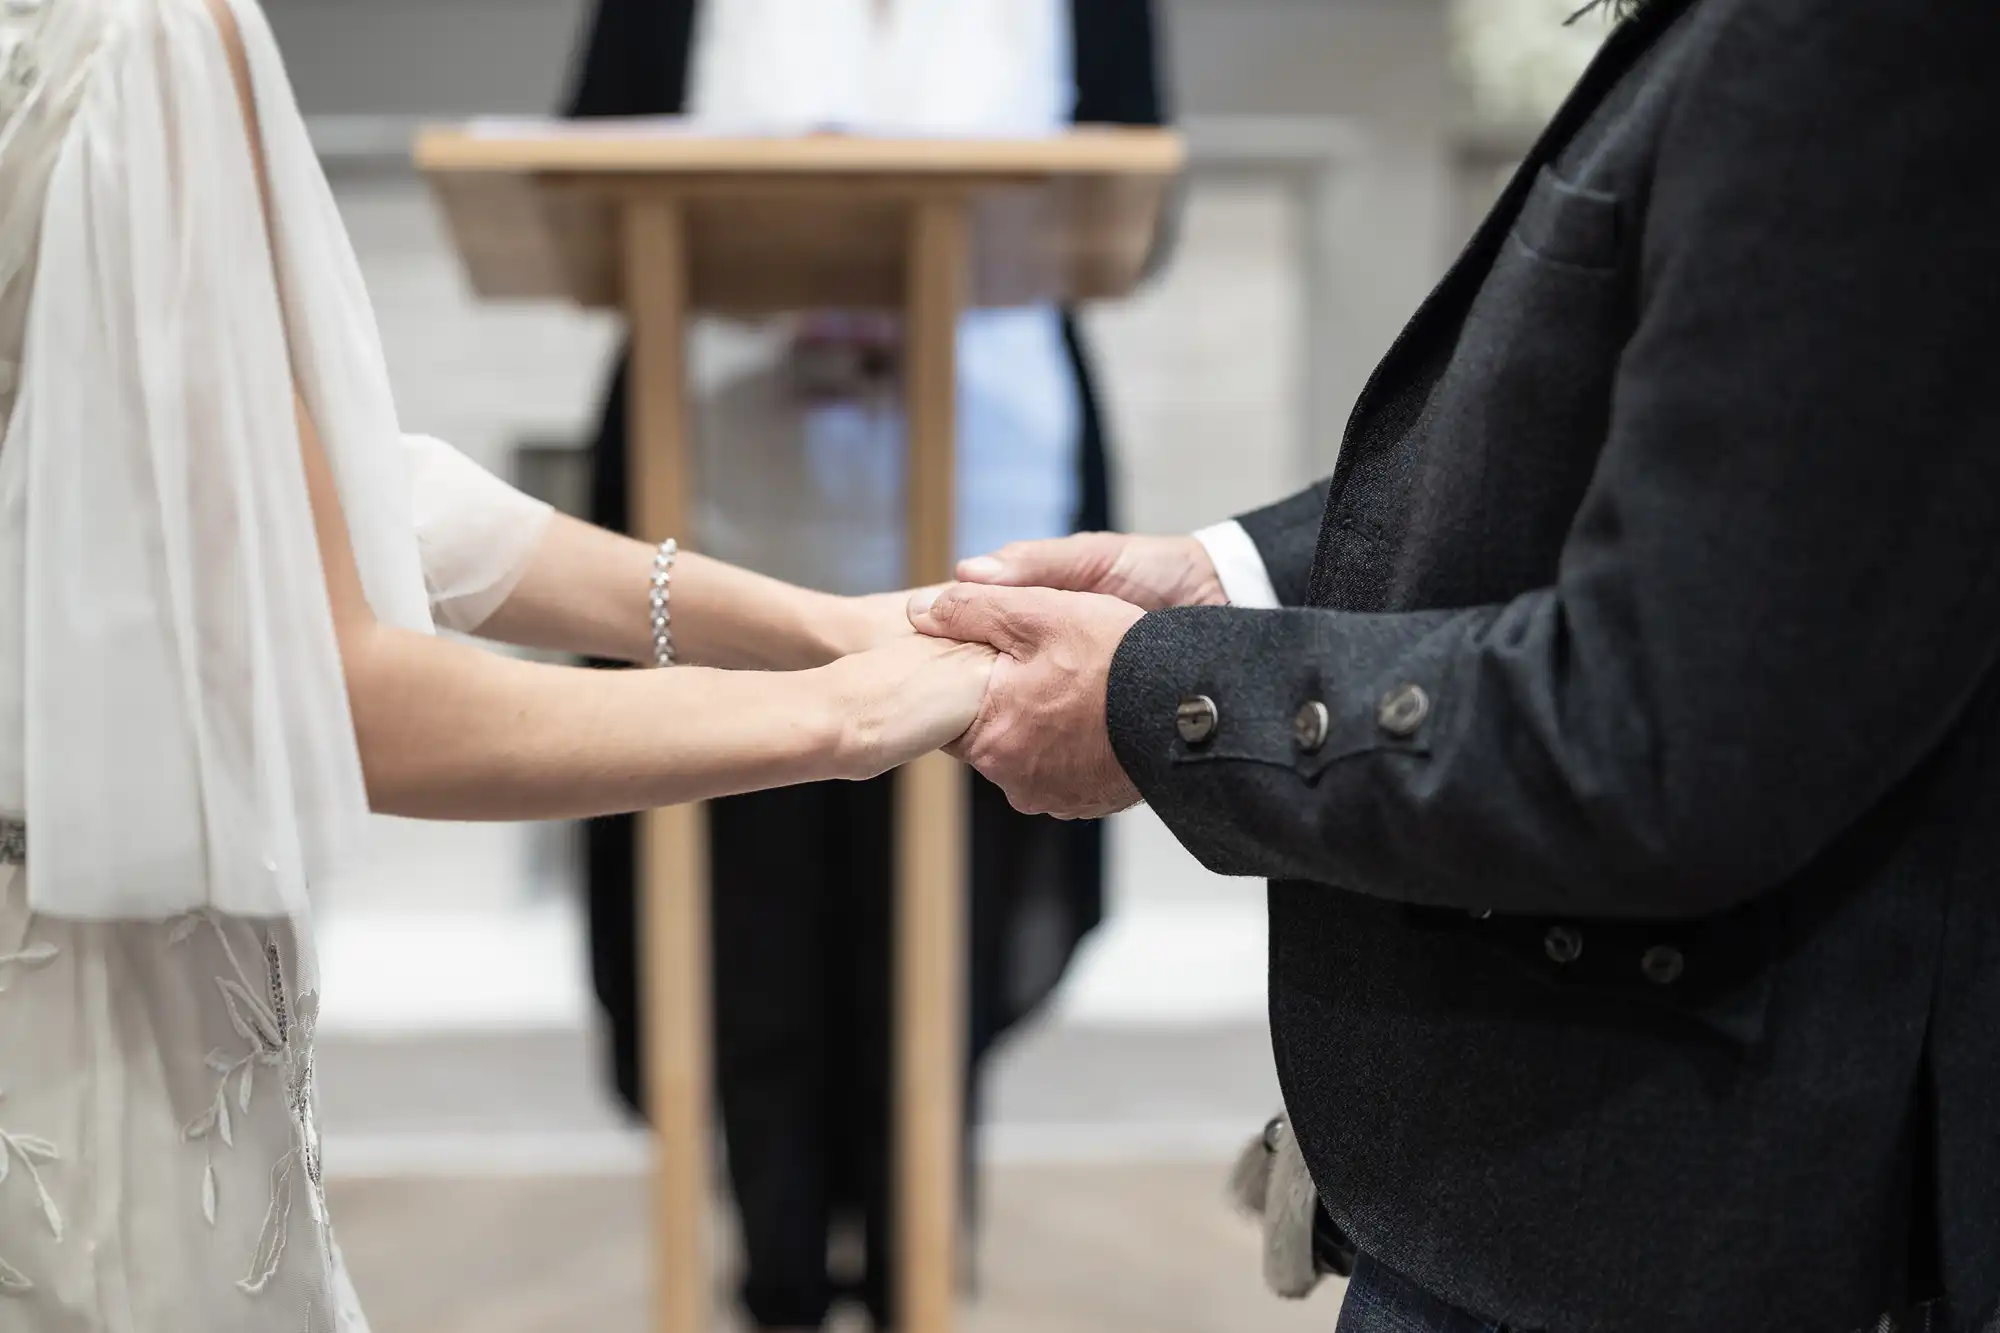 A bride and groom hold hands during a wedding ceremony, with an officiant standing at a wooden lectern in the background.